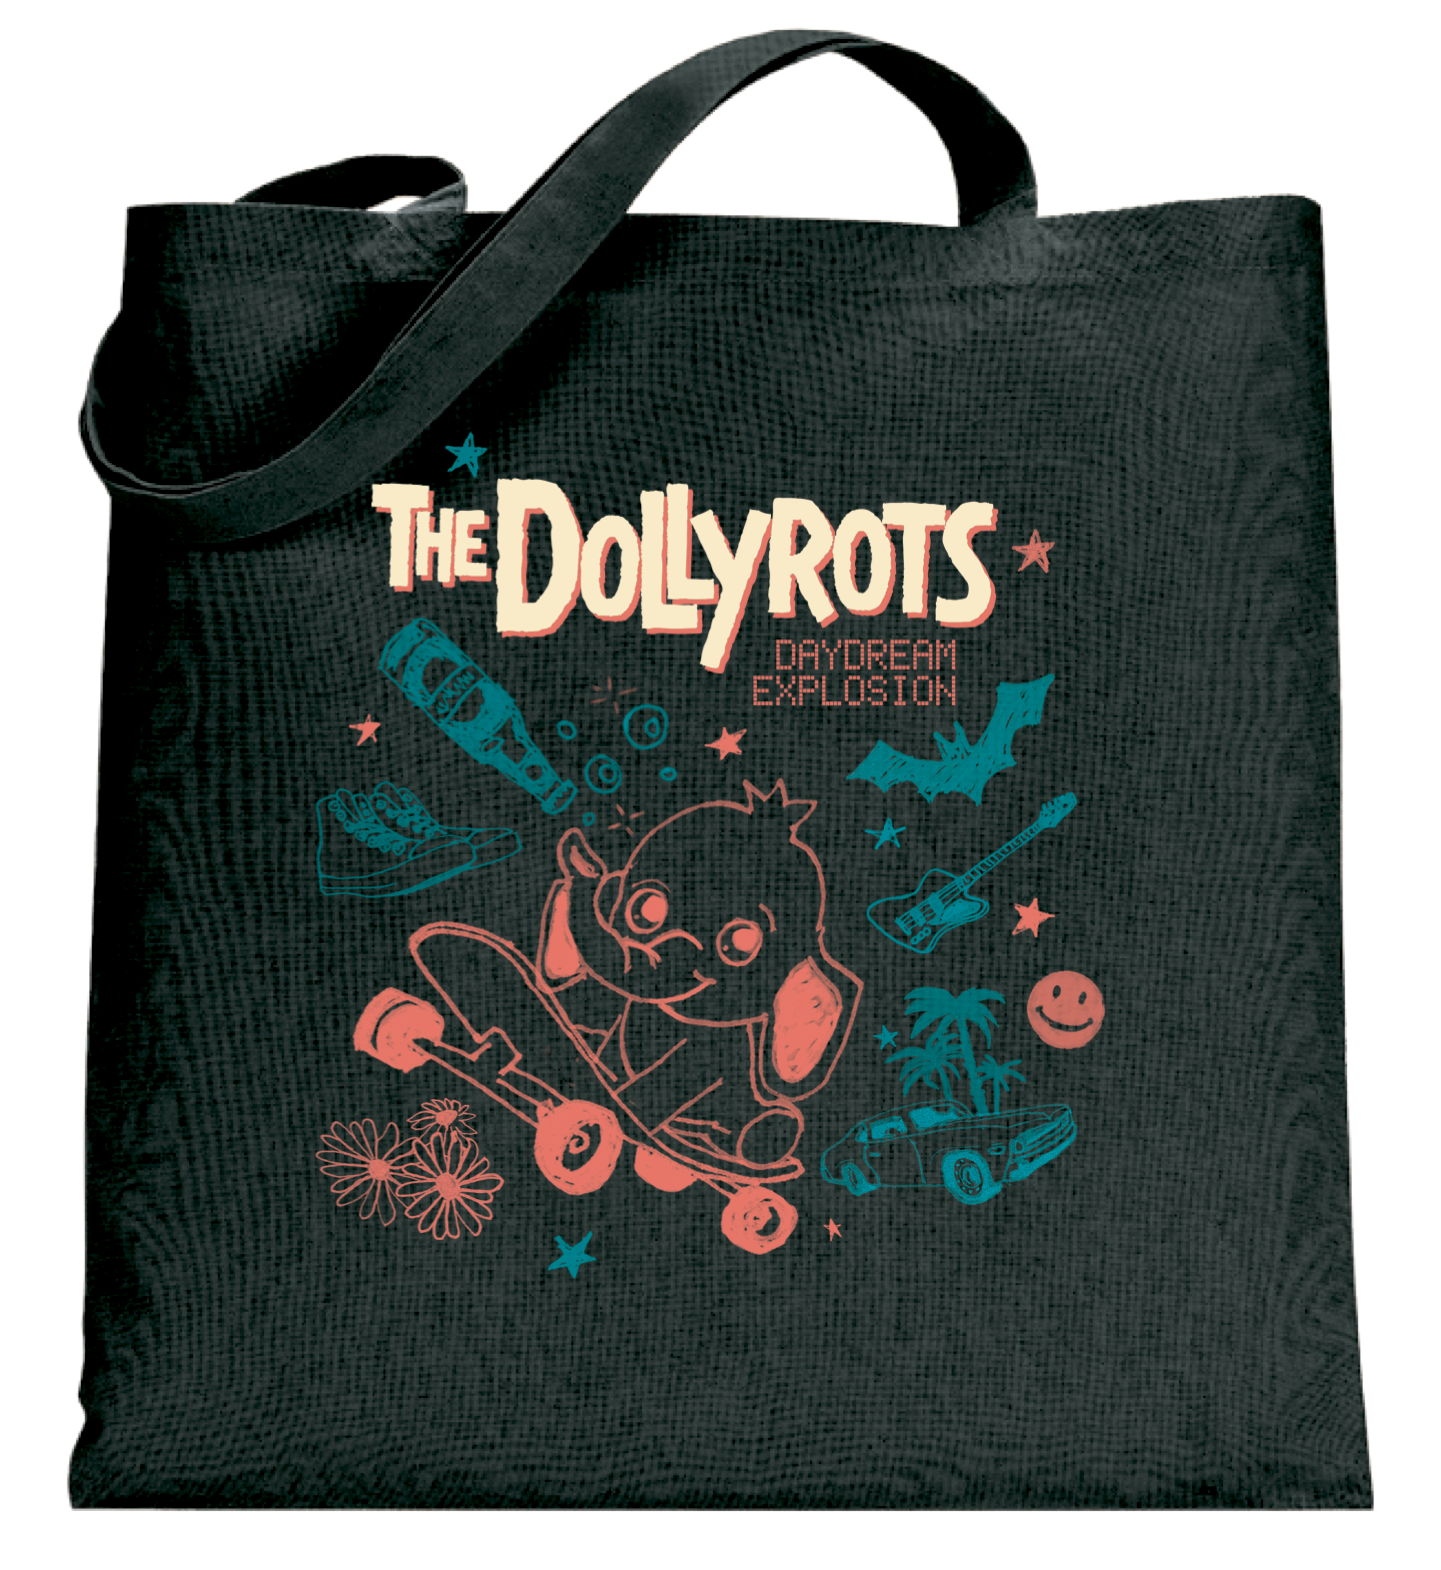 Daydream Explosion Tote Bag